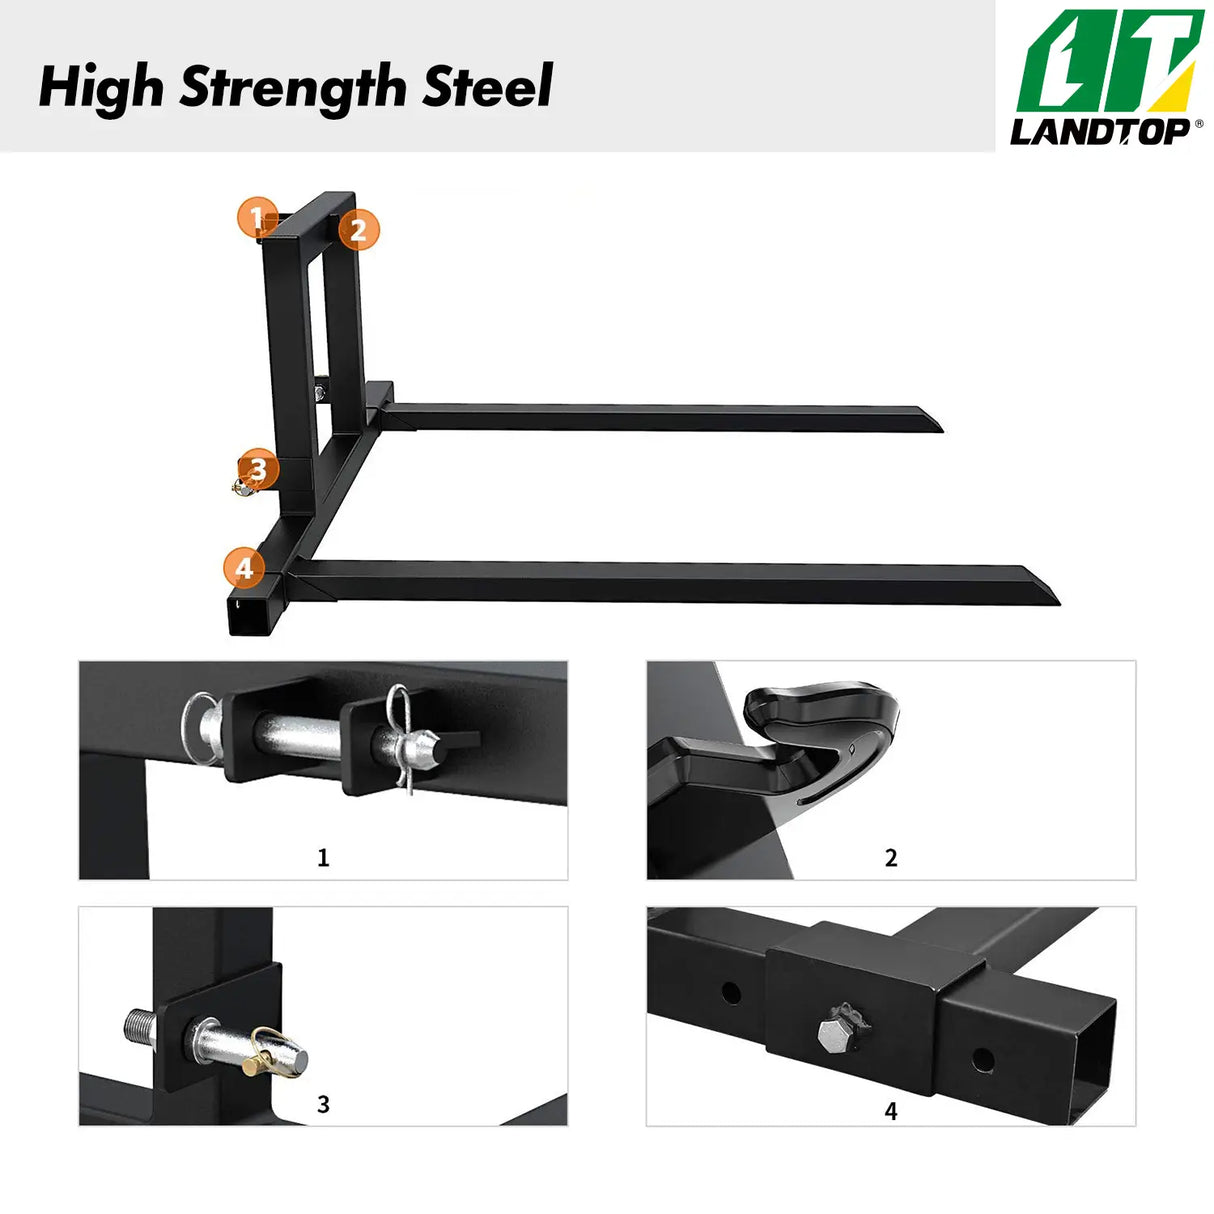 3 Point Hitch Pallet Fork 1500 lbs Capacity Adjustable Pallet Fork Attachments for Category 1 Tractor